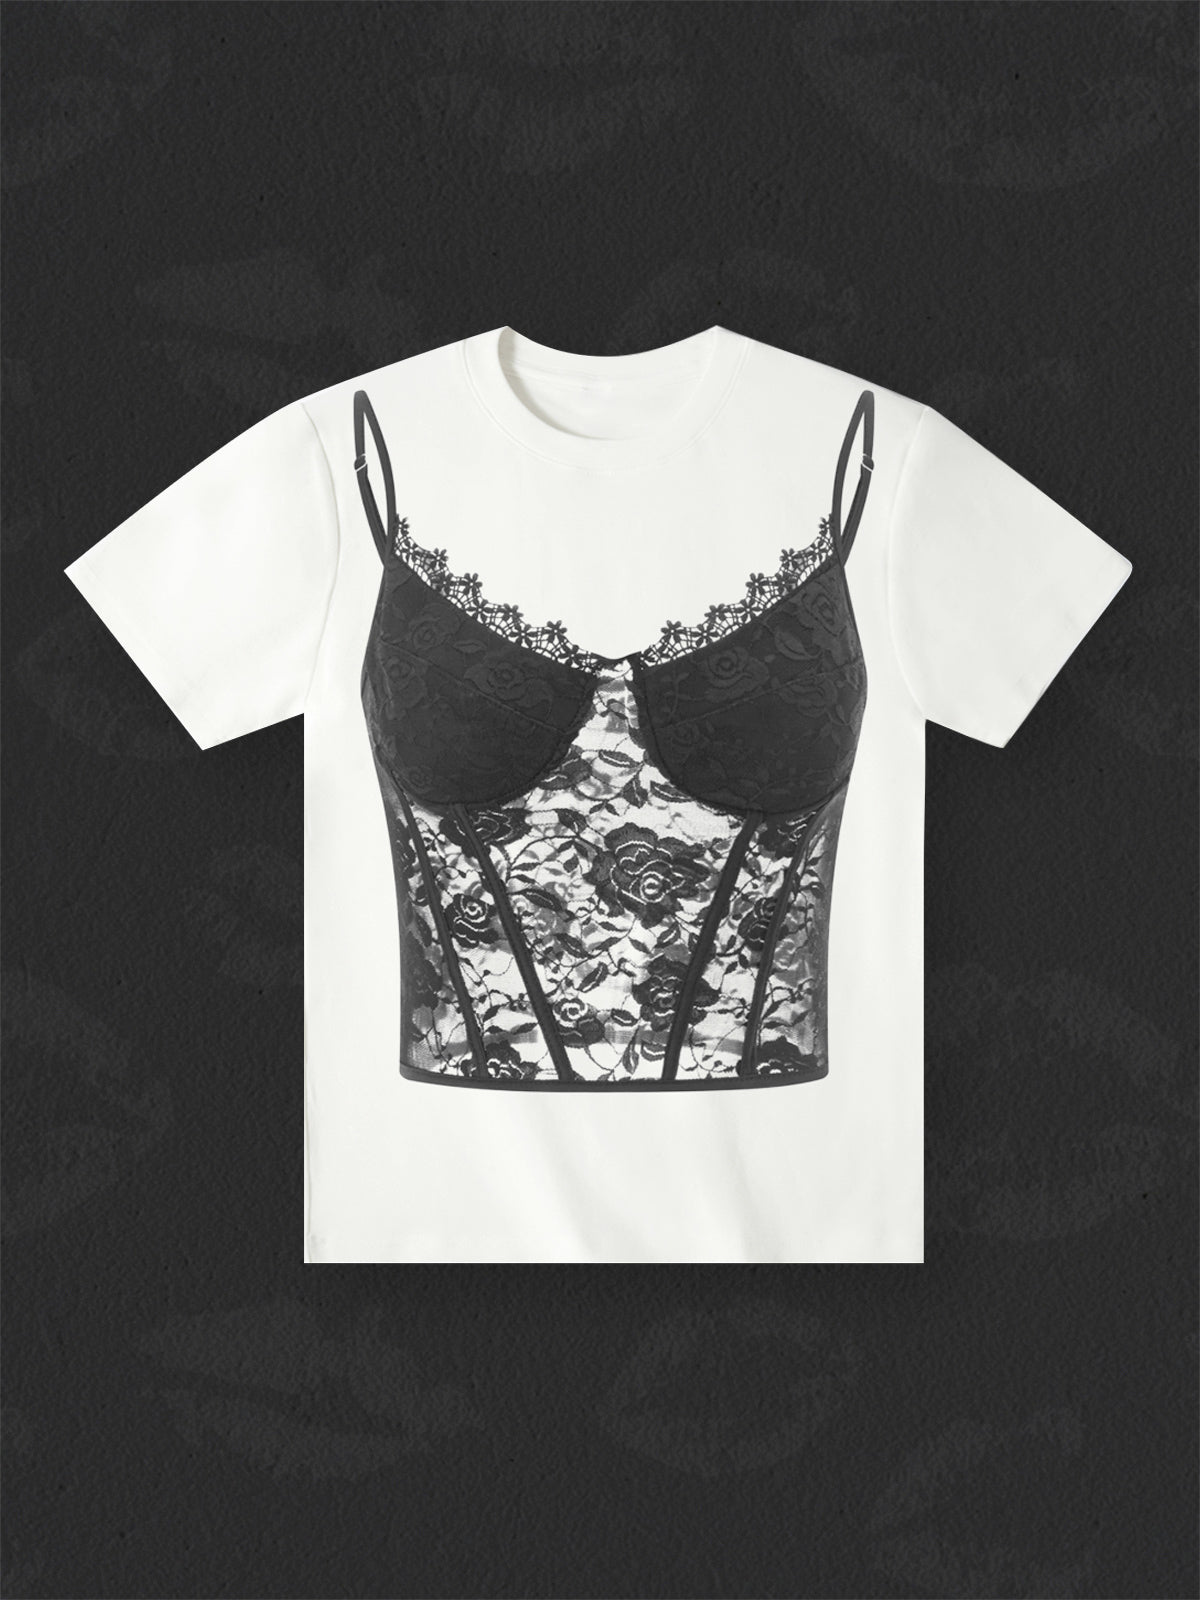 Sexy lace-print baby tee